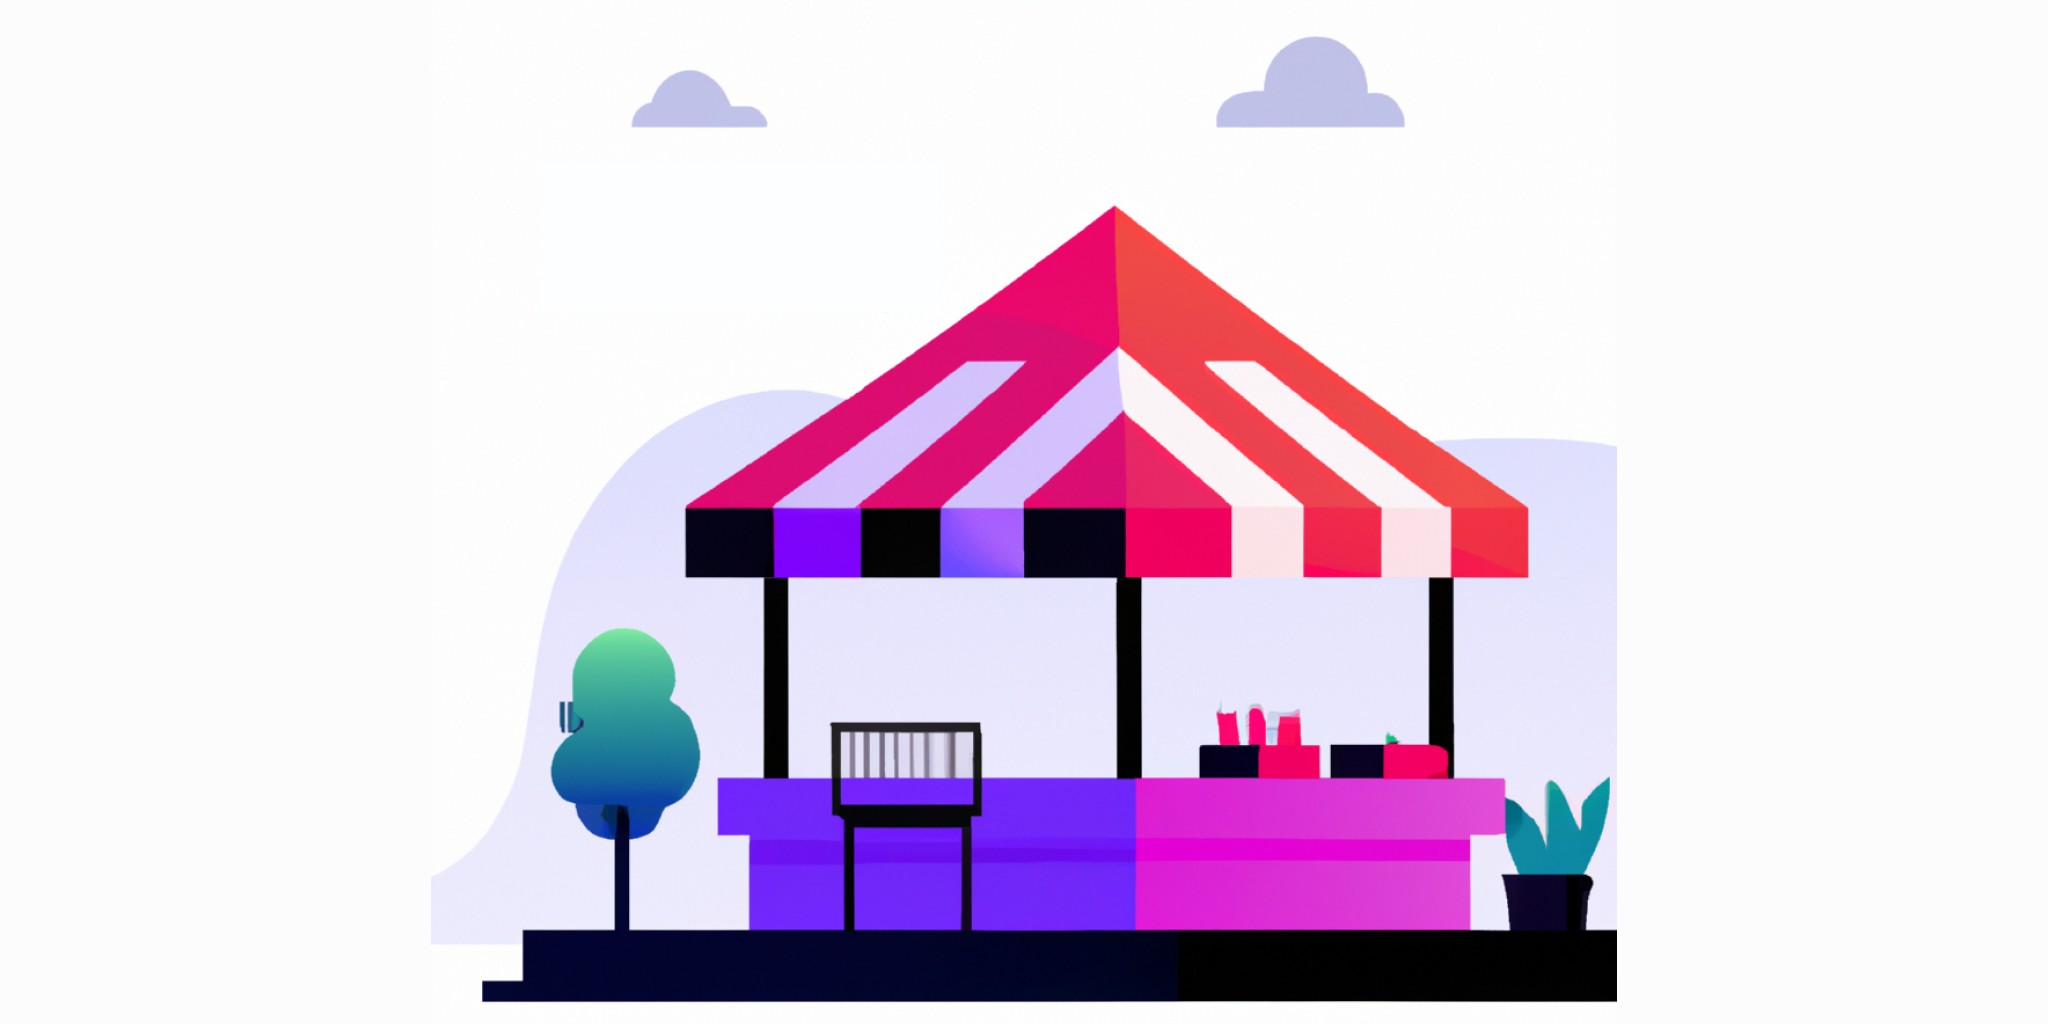 marketplace in flat illustration style with gradients and white background